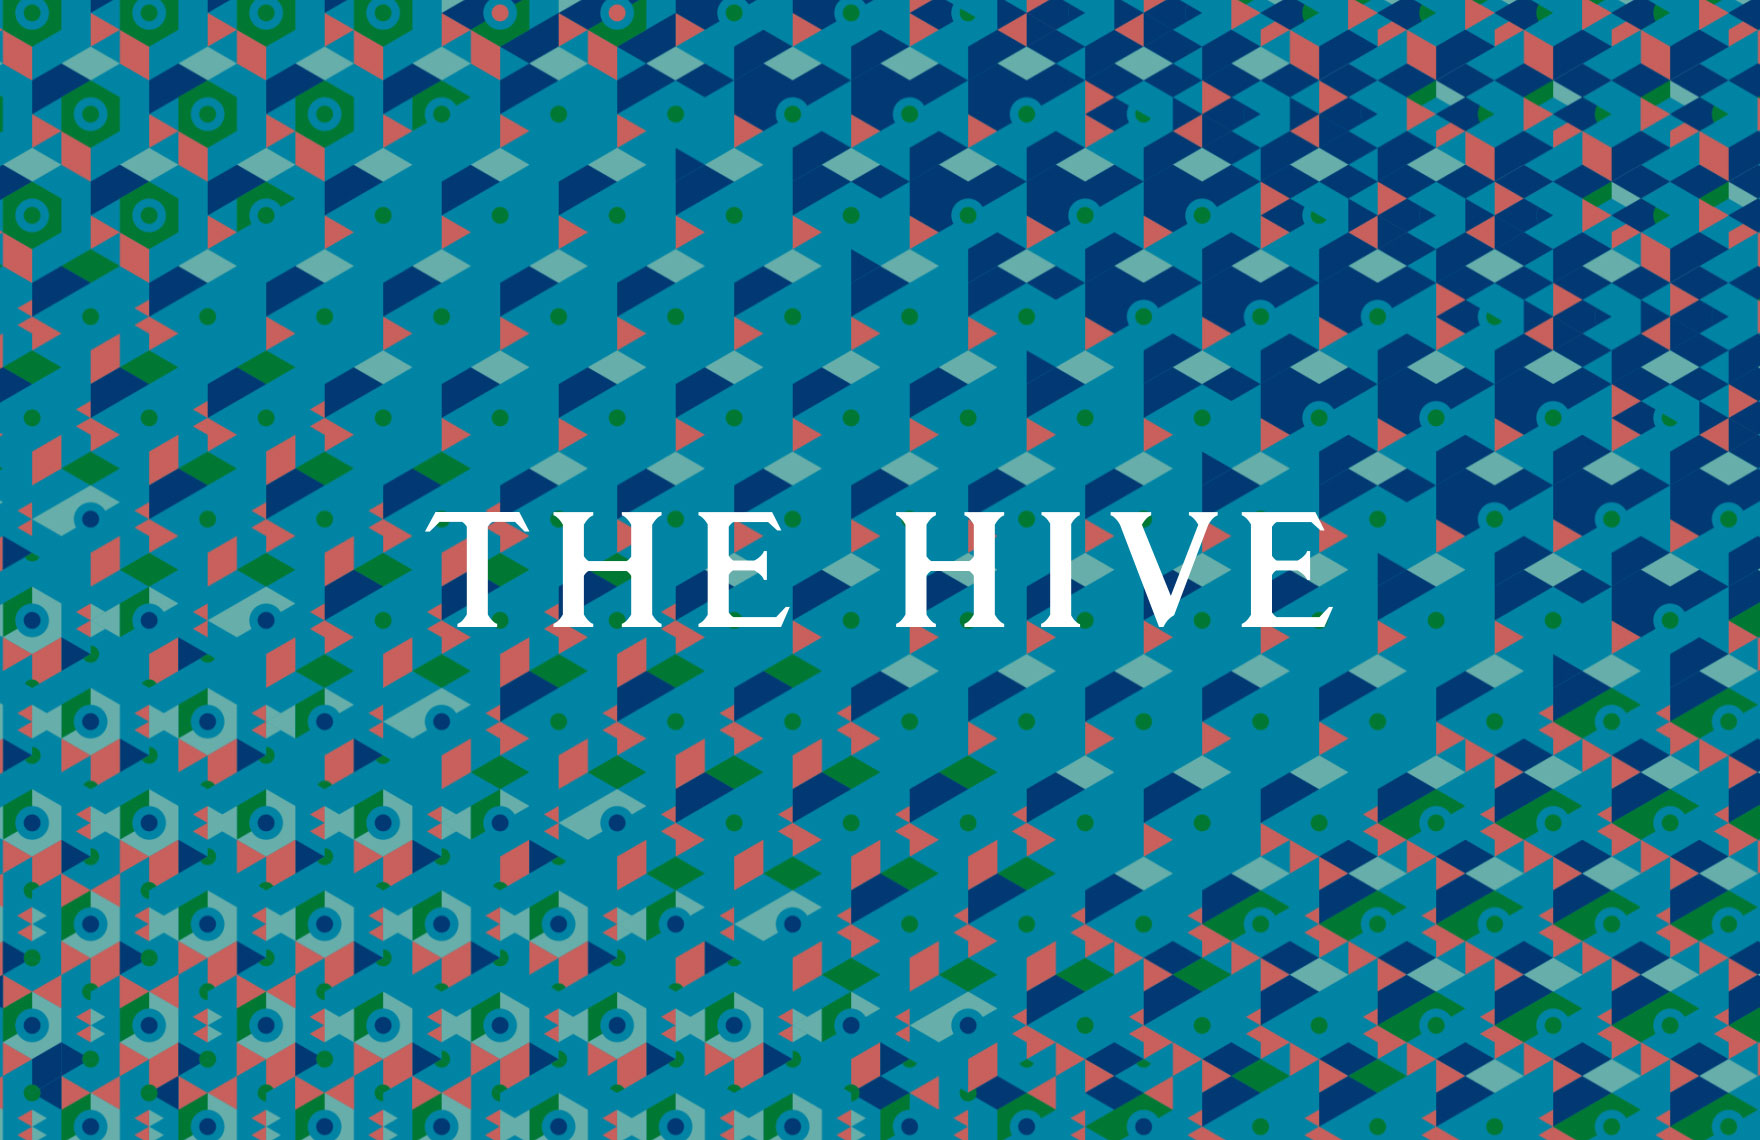 Geometric pattern design and branding for hospitality and hotels event The Hive